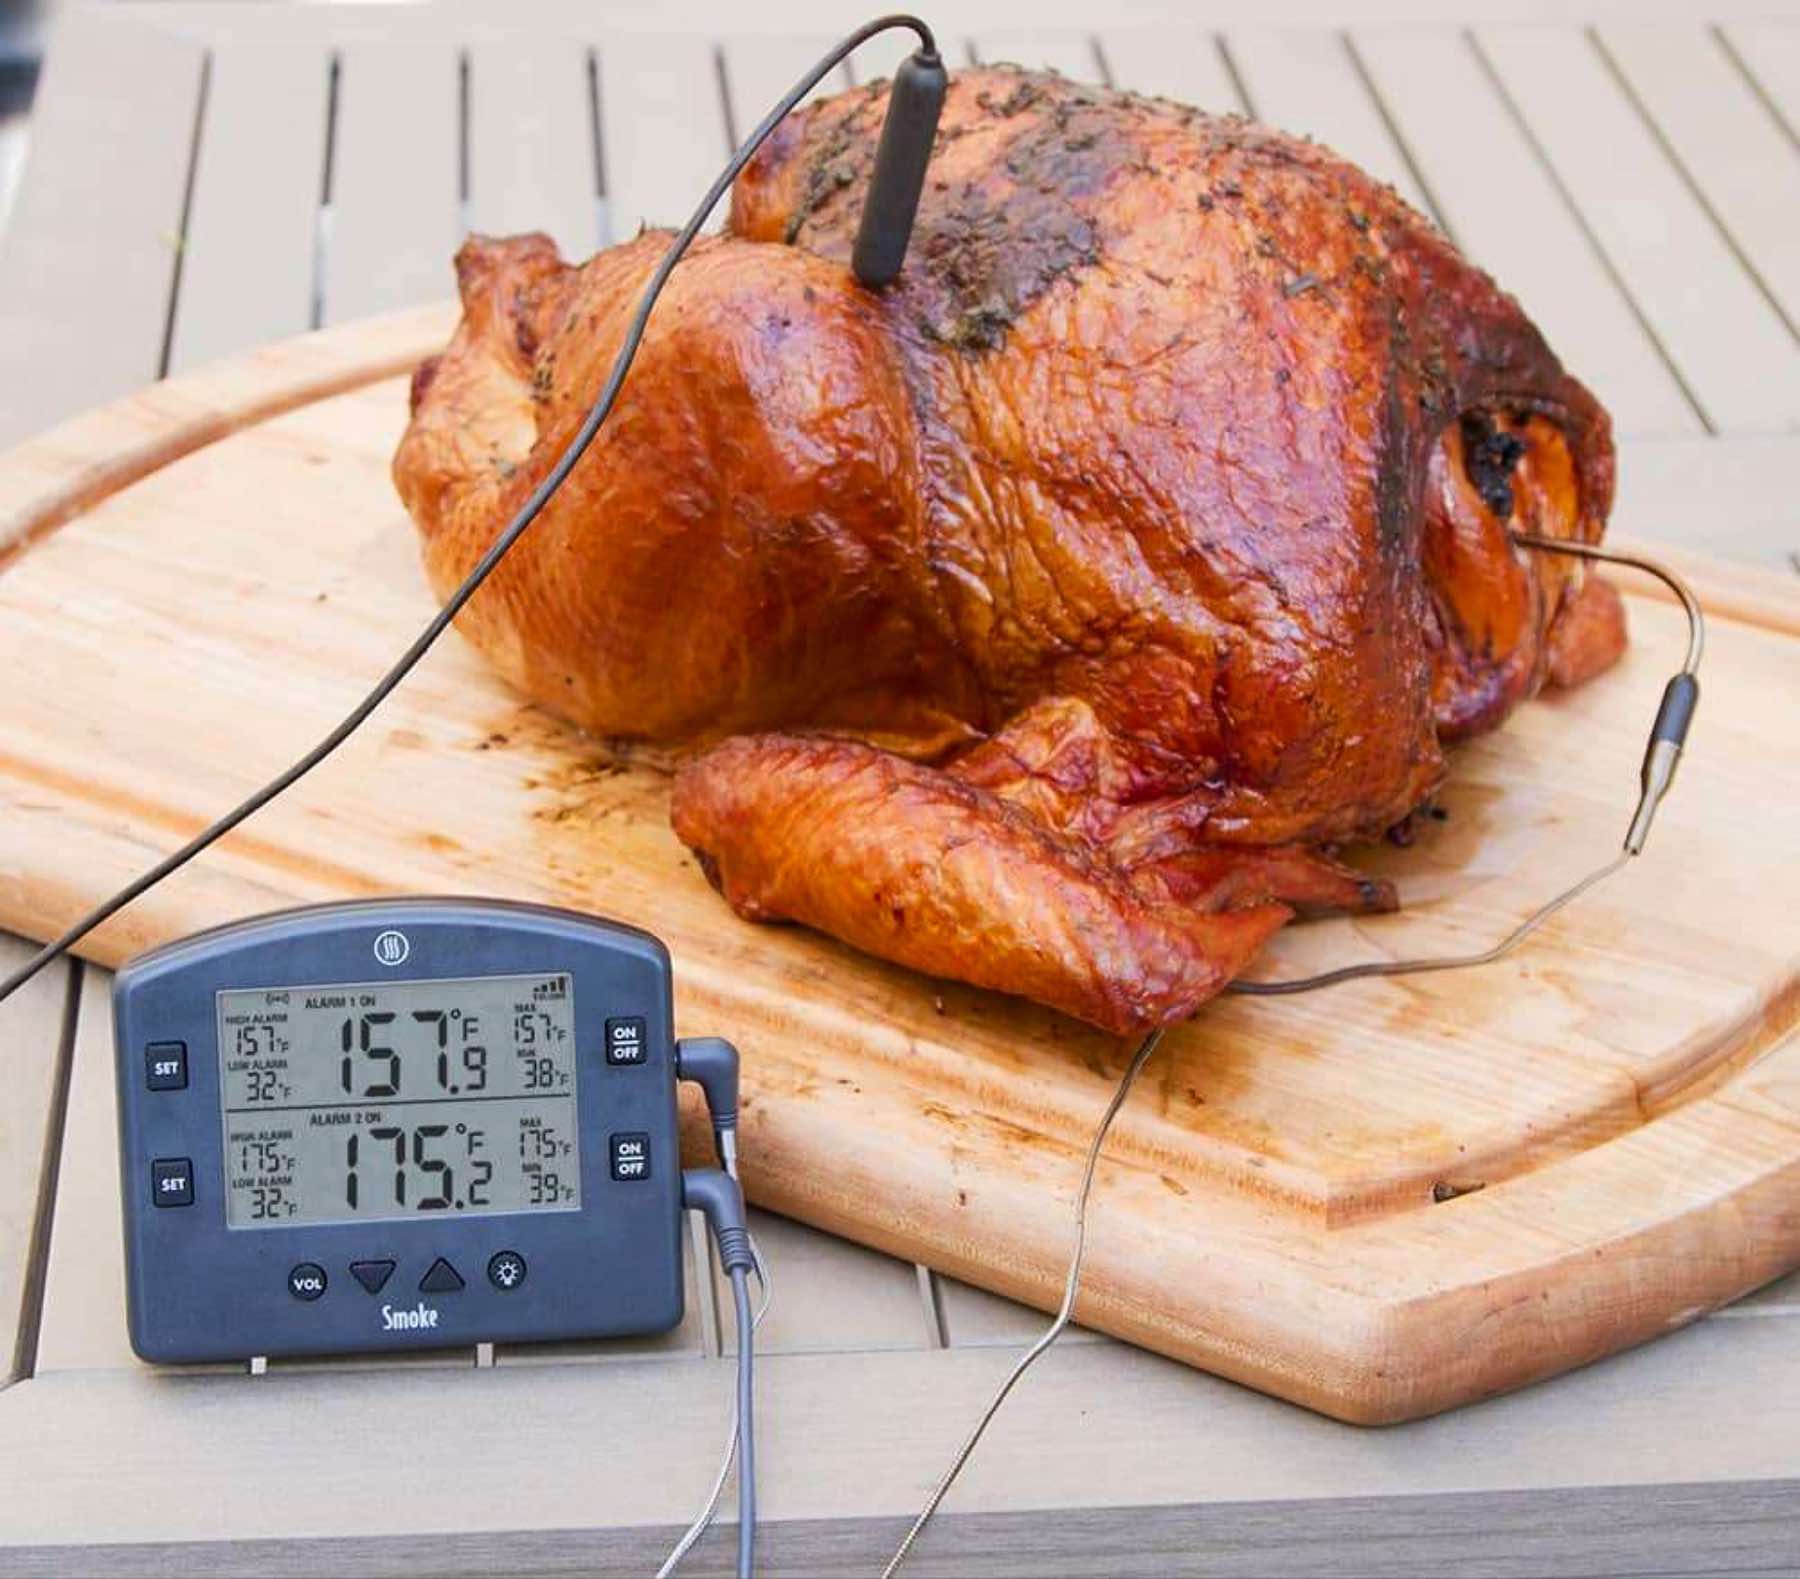 ThermoWorks “Smoke” Two-Channel Remote BBQ Alarm Thermometer